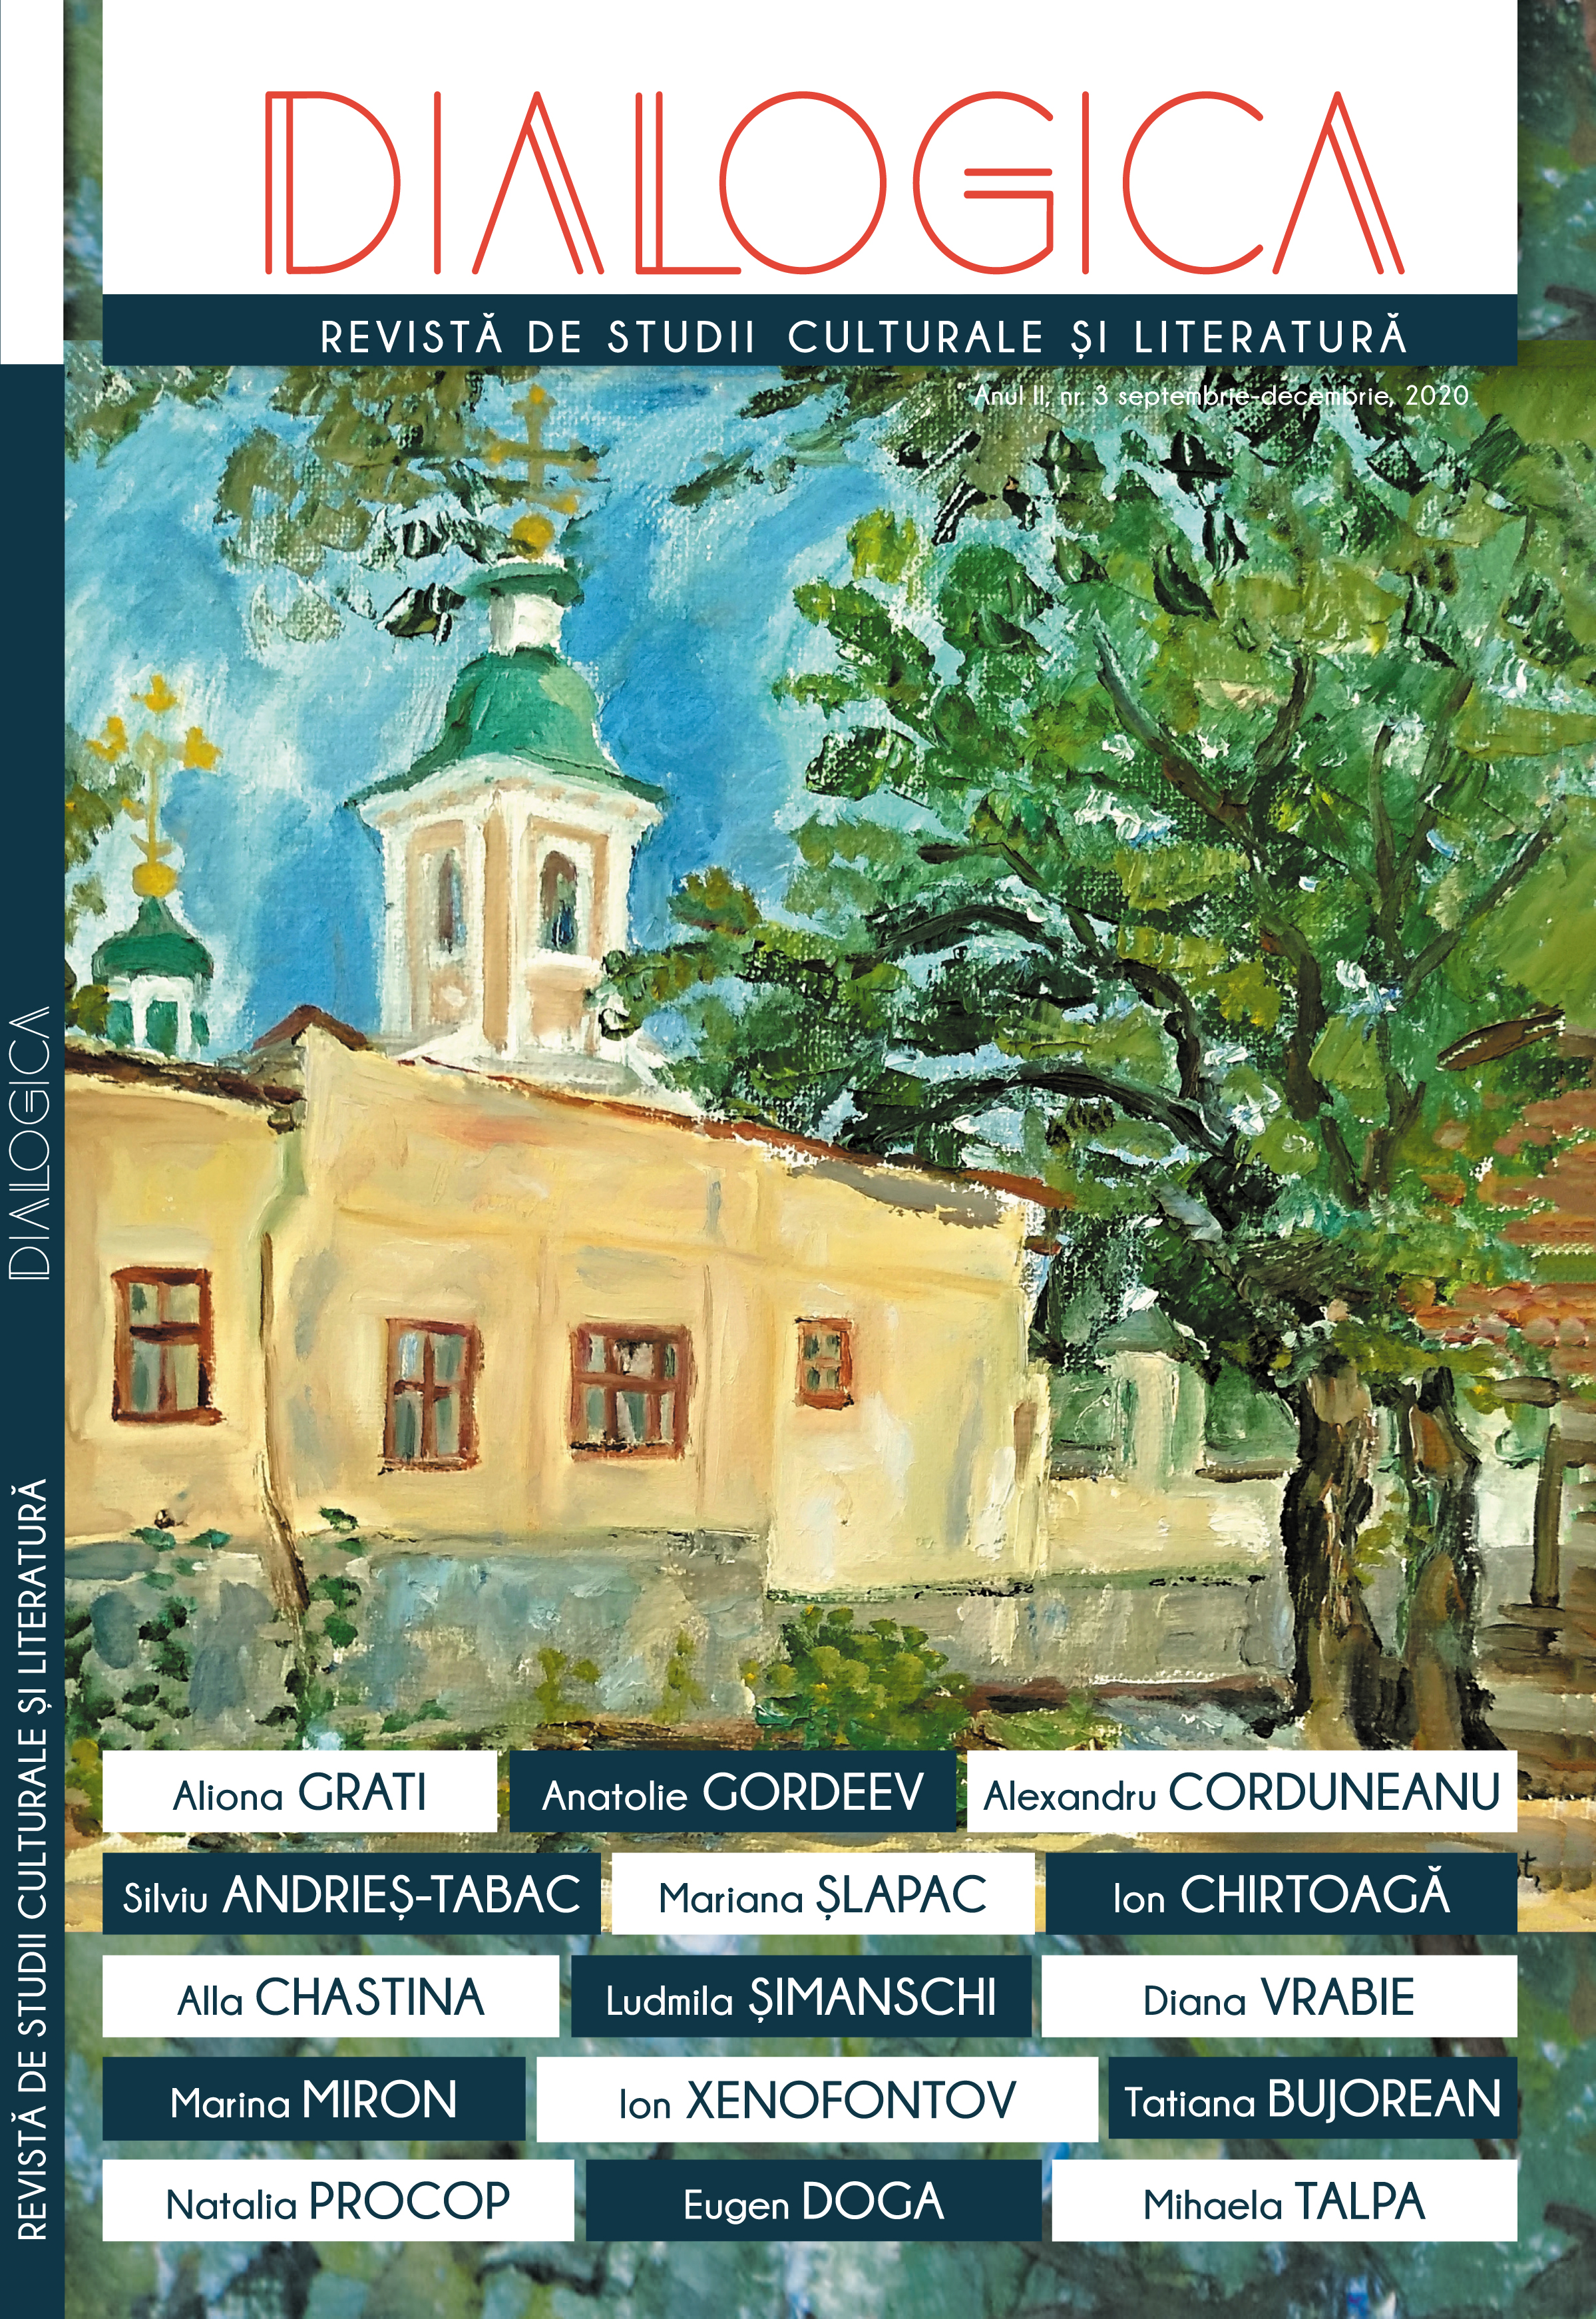 Chișinău in tourist routes: some historical aspects Cover Image